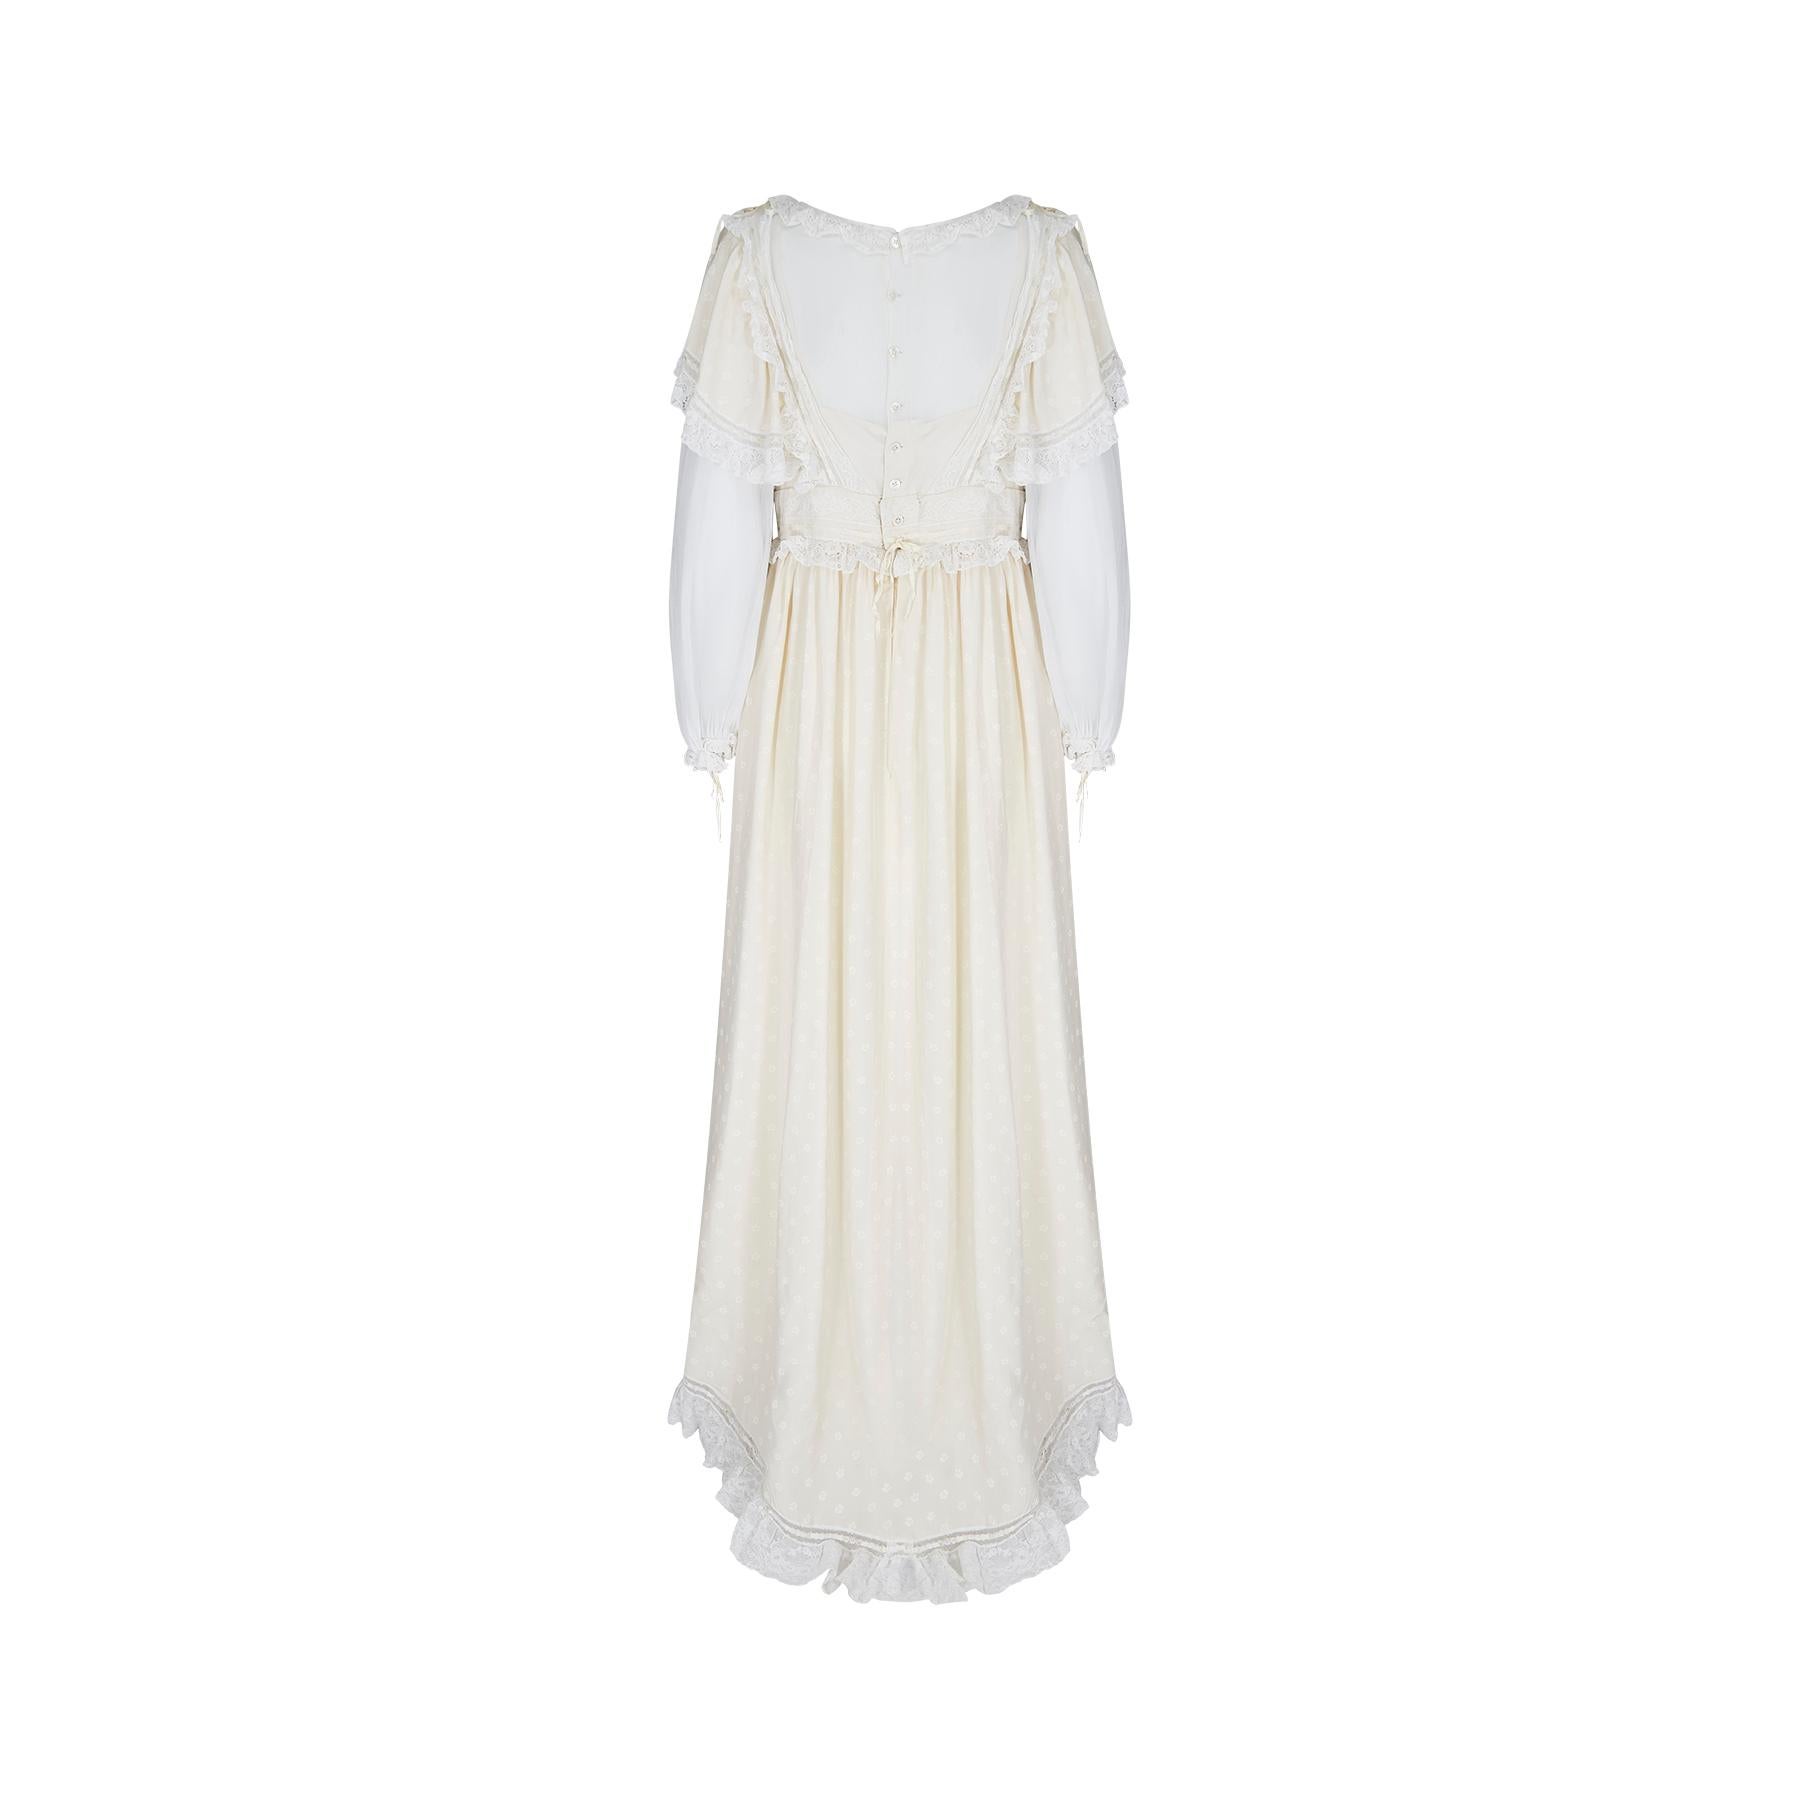 Gray 1970s Gina Fratini Cream Silk and Lace Wedding Dress For Sale